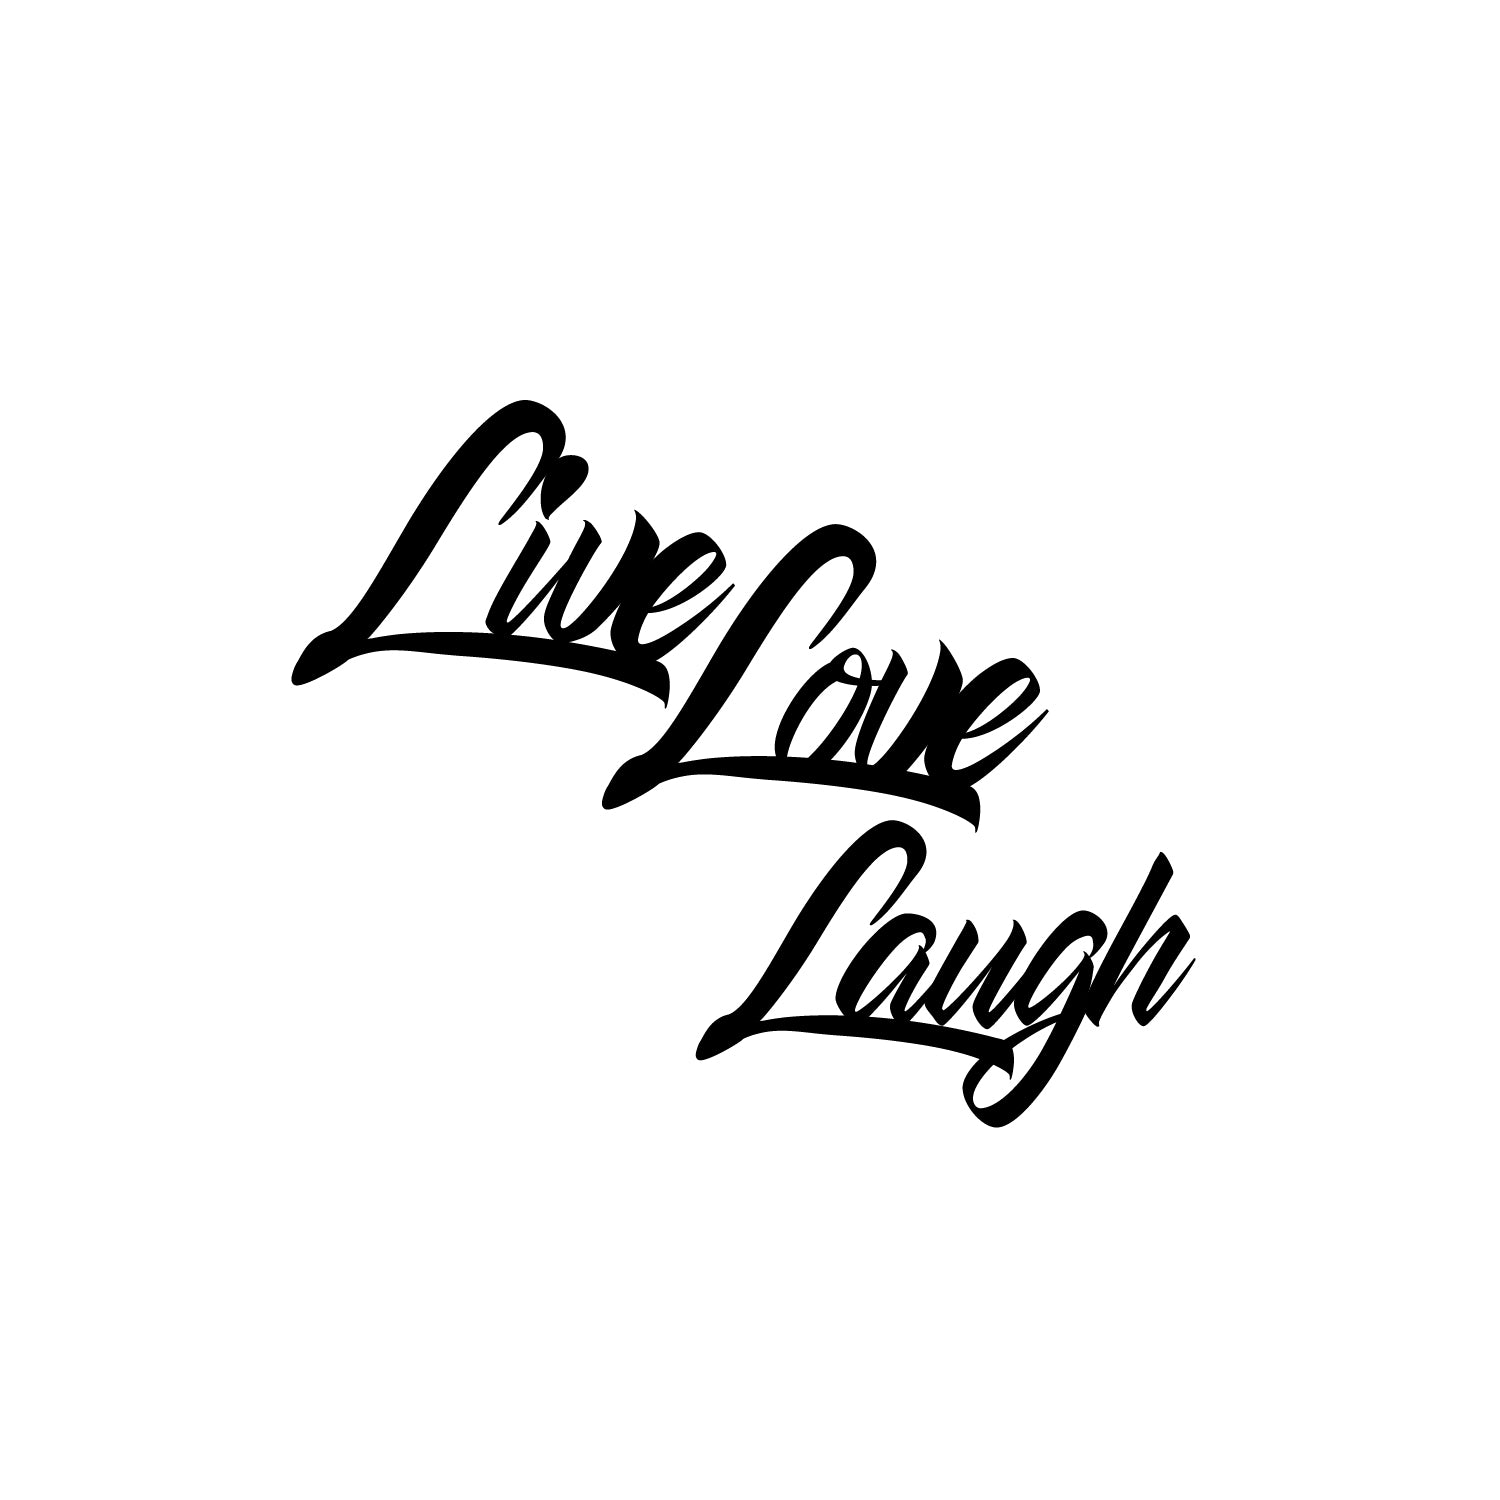 "Live Love Laugh" Black MDF Engineered Wooden Wall Art/Hanging Cutout for Home Decor